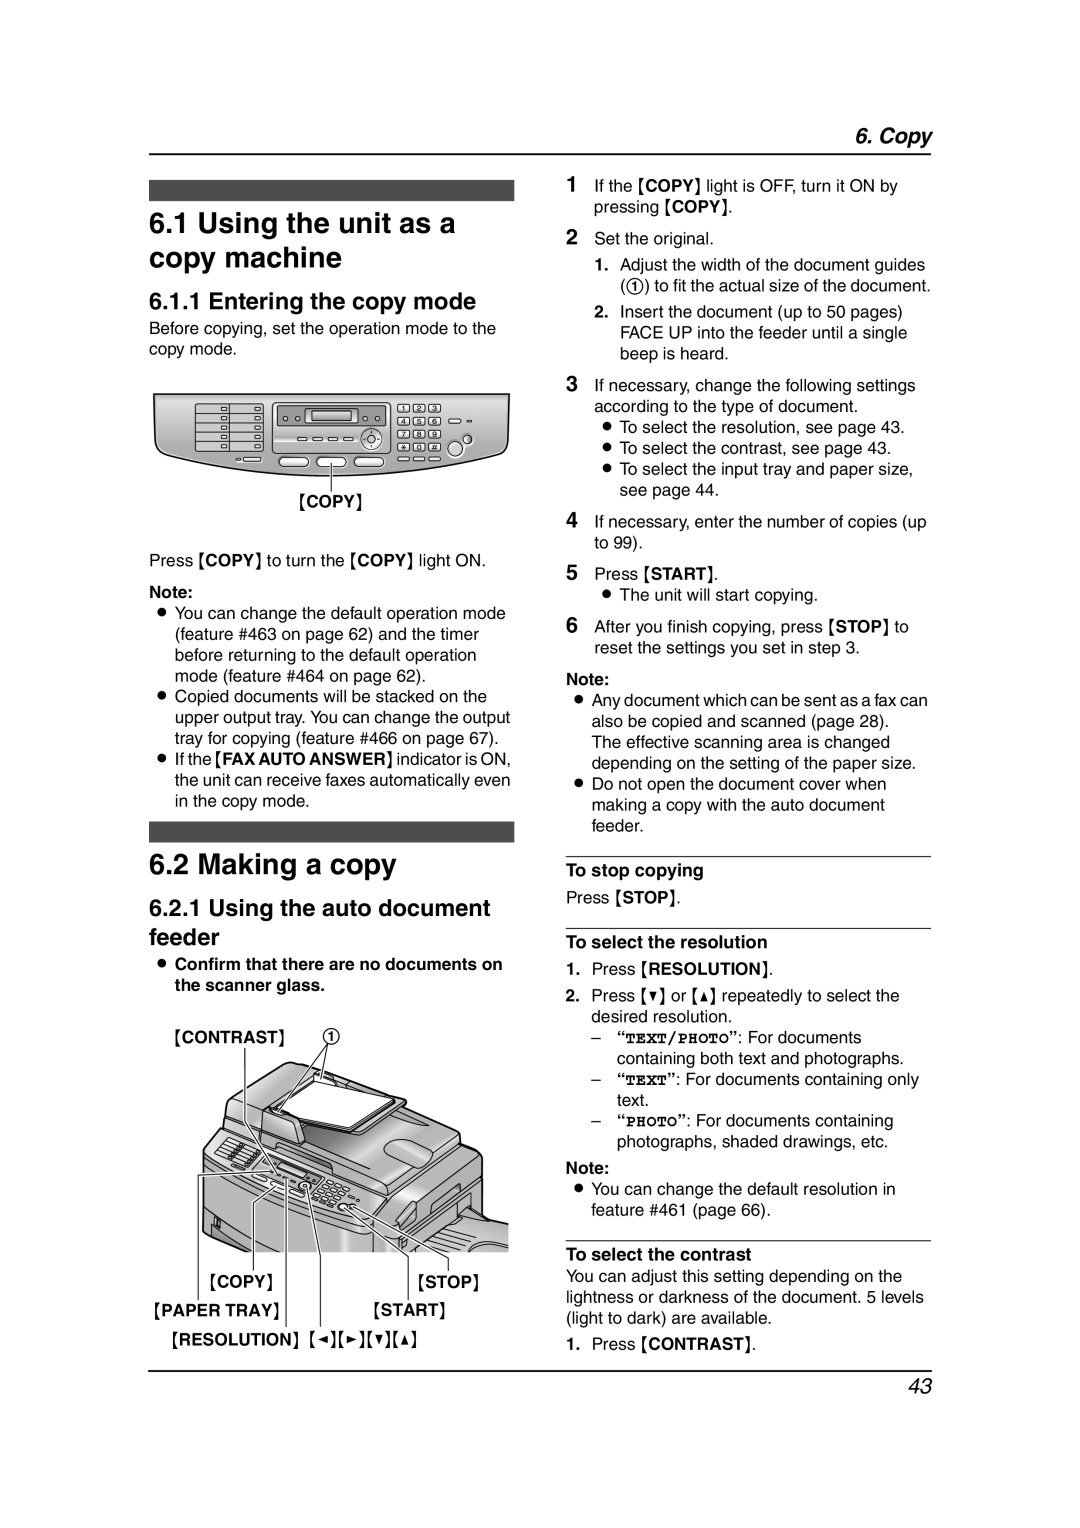 Panasonic KX-FLB851 manual Using the unit as a copy machine, Making a copy, Entering the copy mode, Copy, To stop copying 